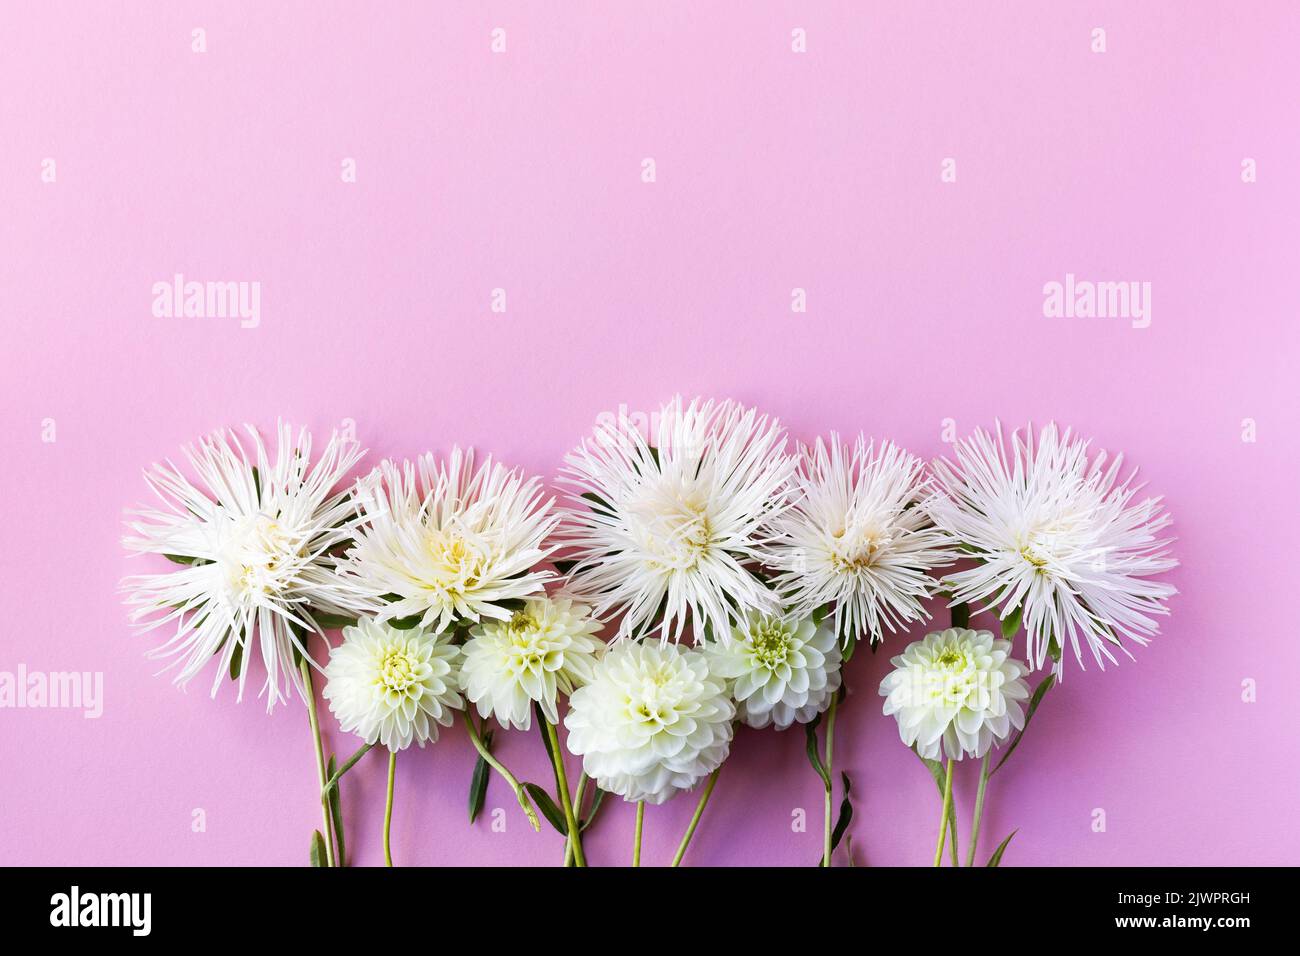 Floral arrangement of white aster and dahlia flowers on a pink background with a place for text, flat lay Stock Photo